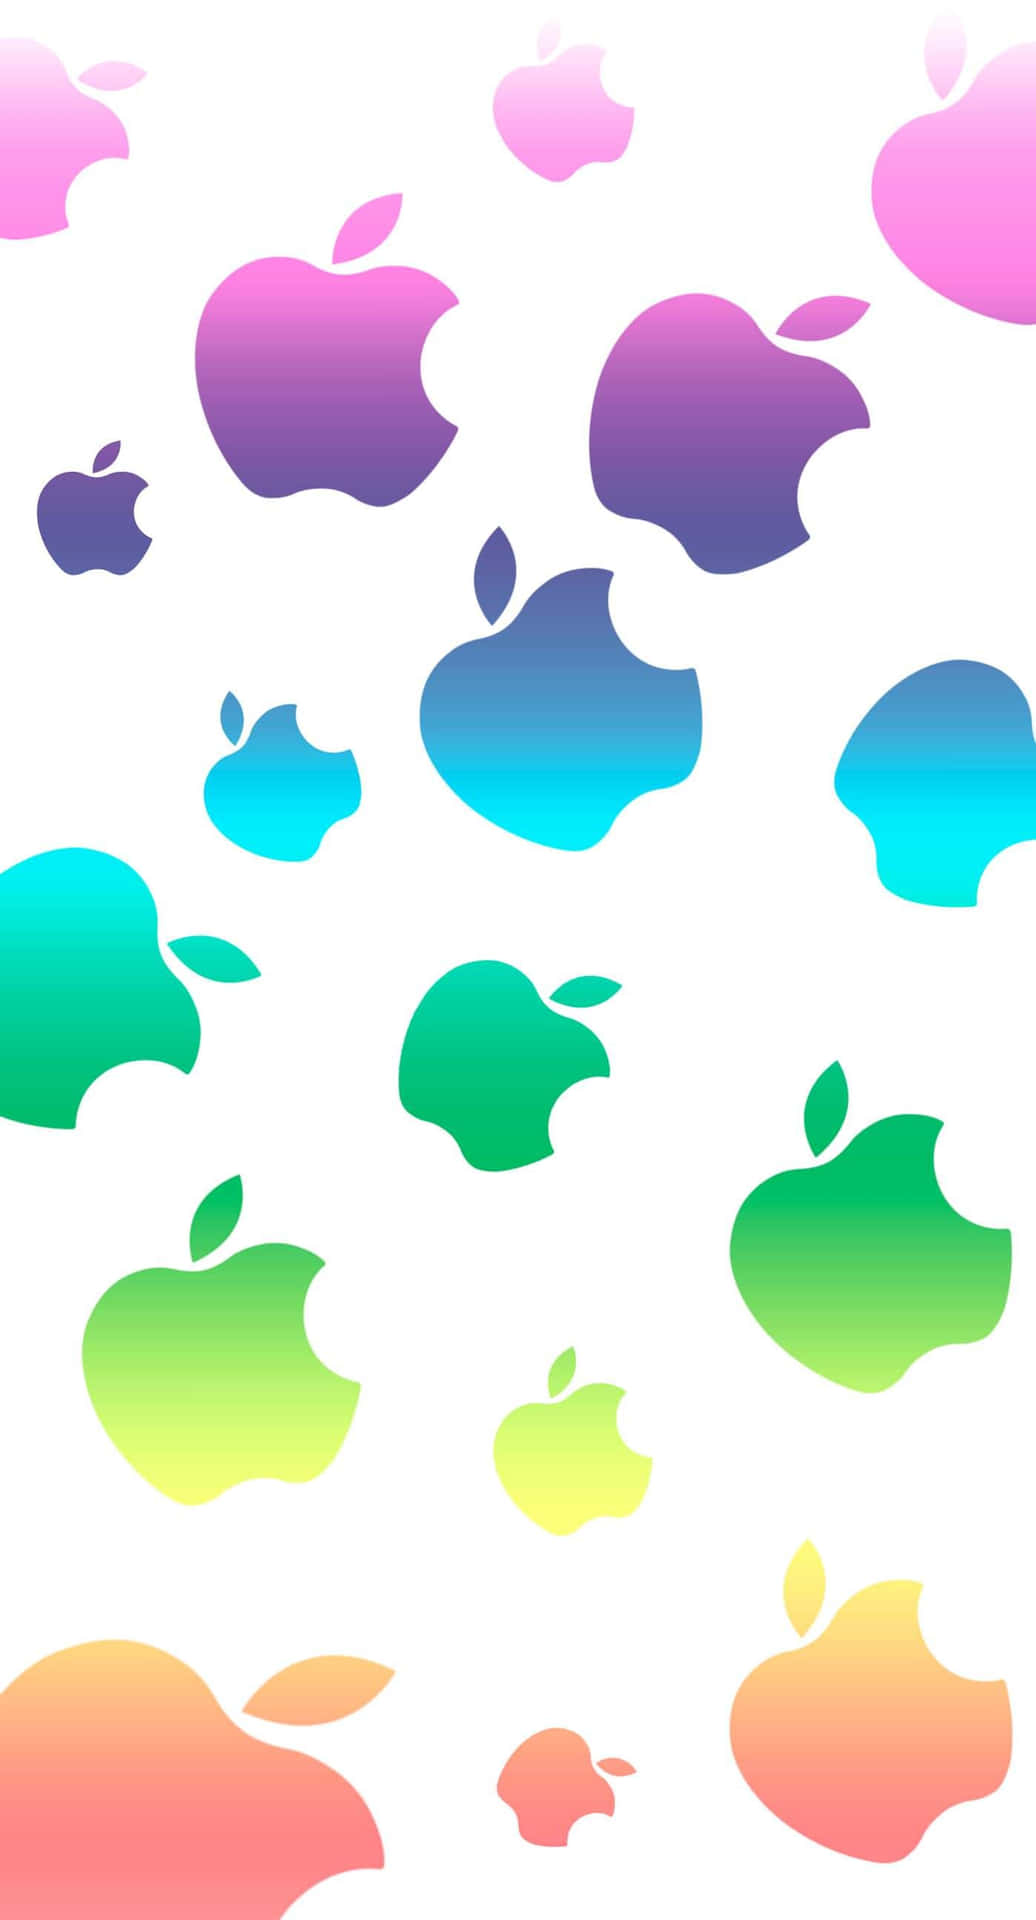 Colorful Iphone Gradient Apple Logos Picture